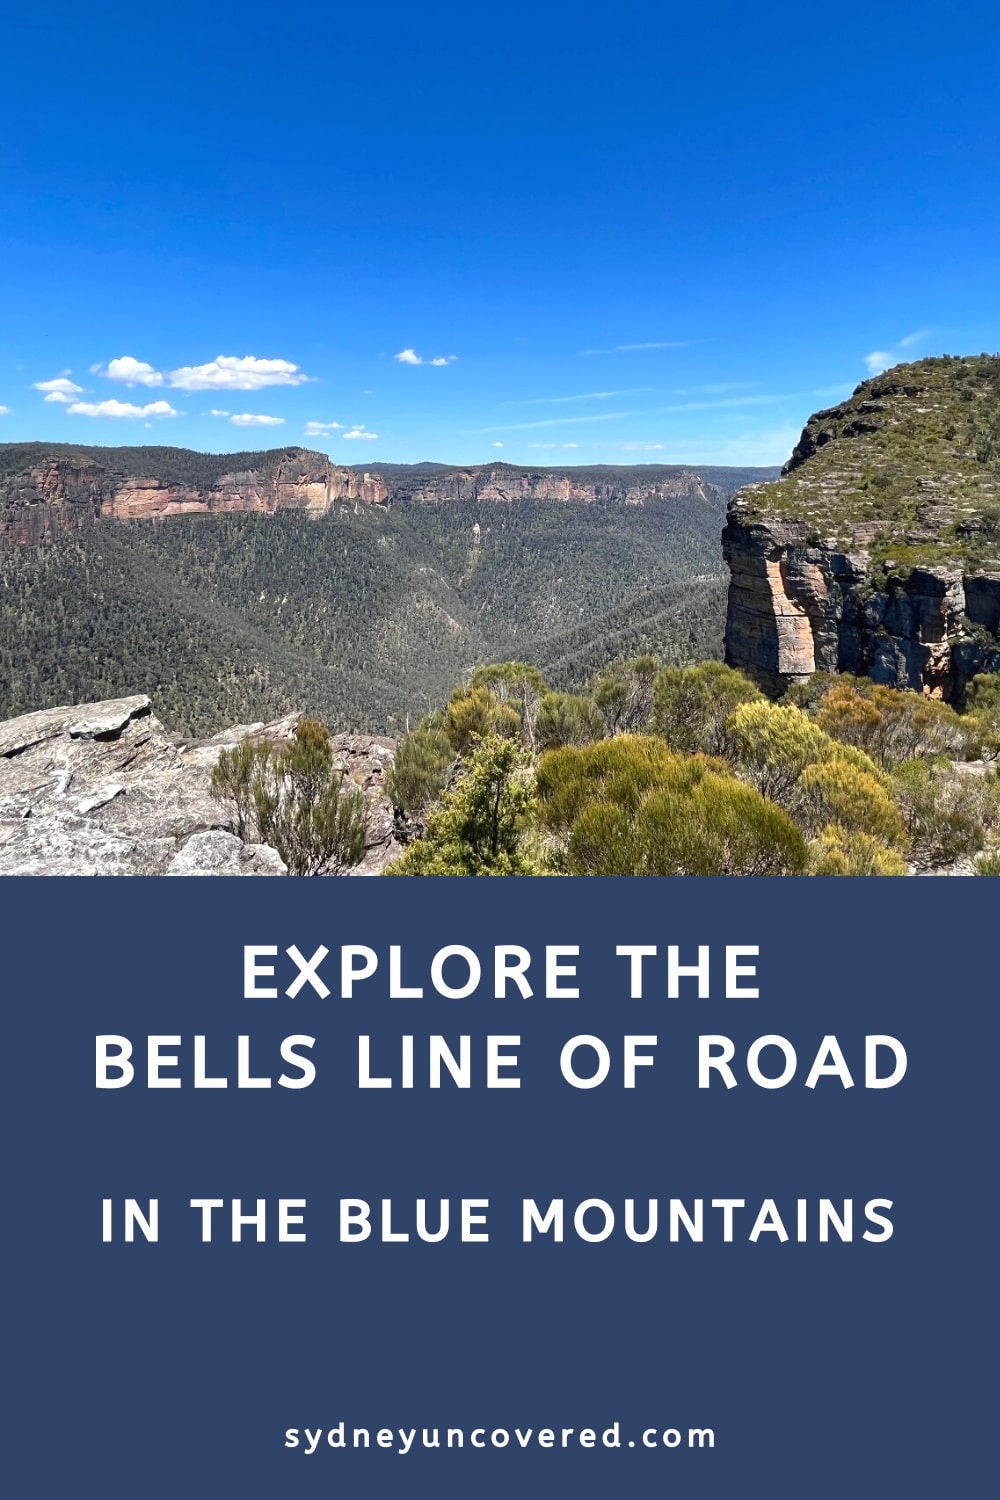 Explore the Bells Line of Road in the Blue Mountains